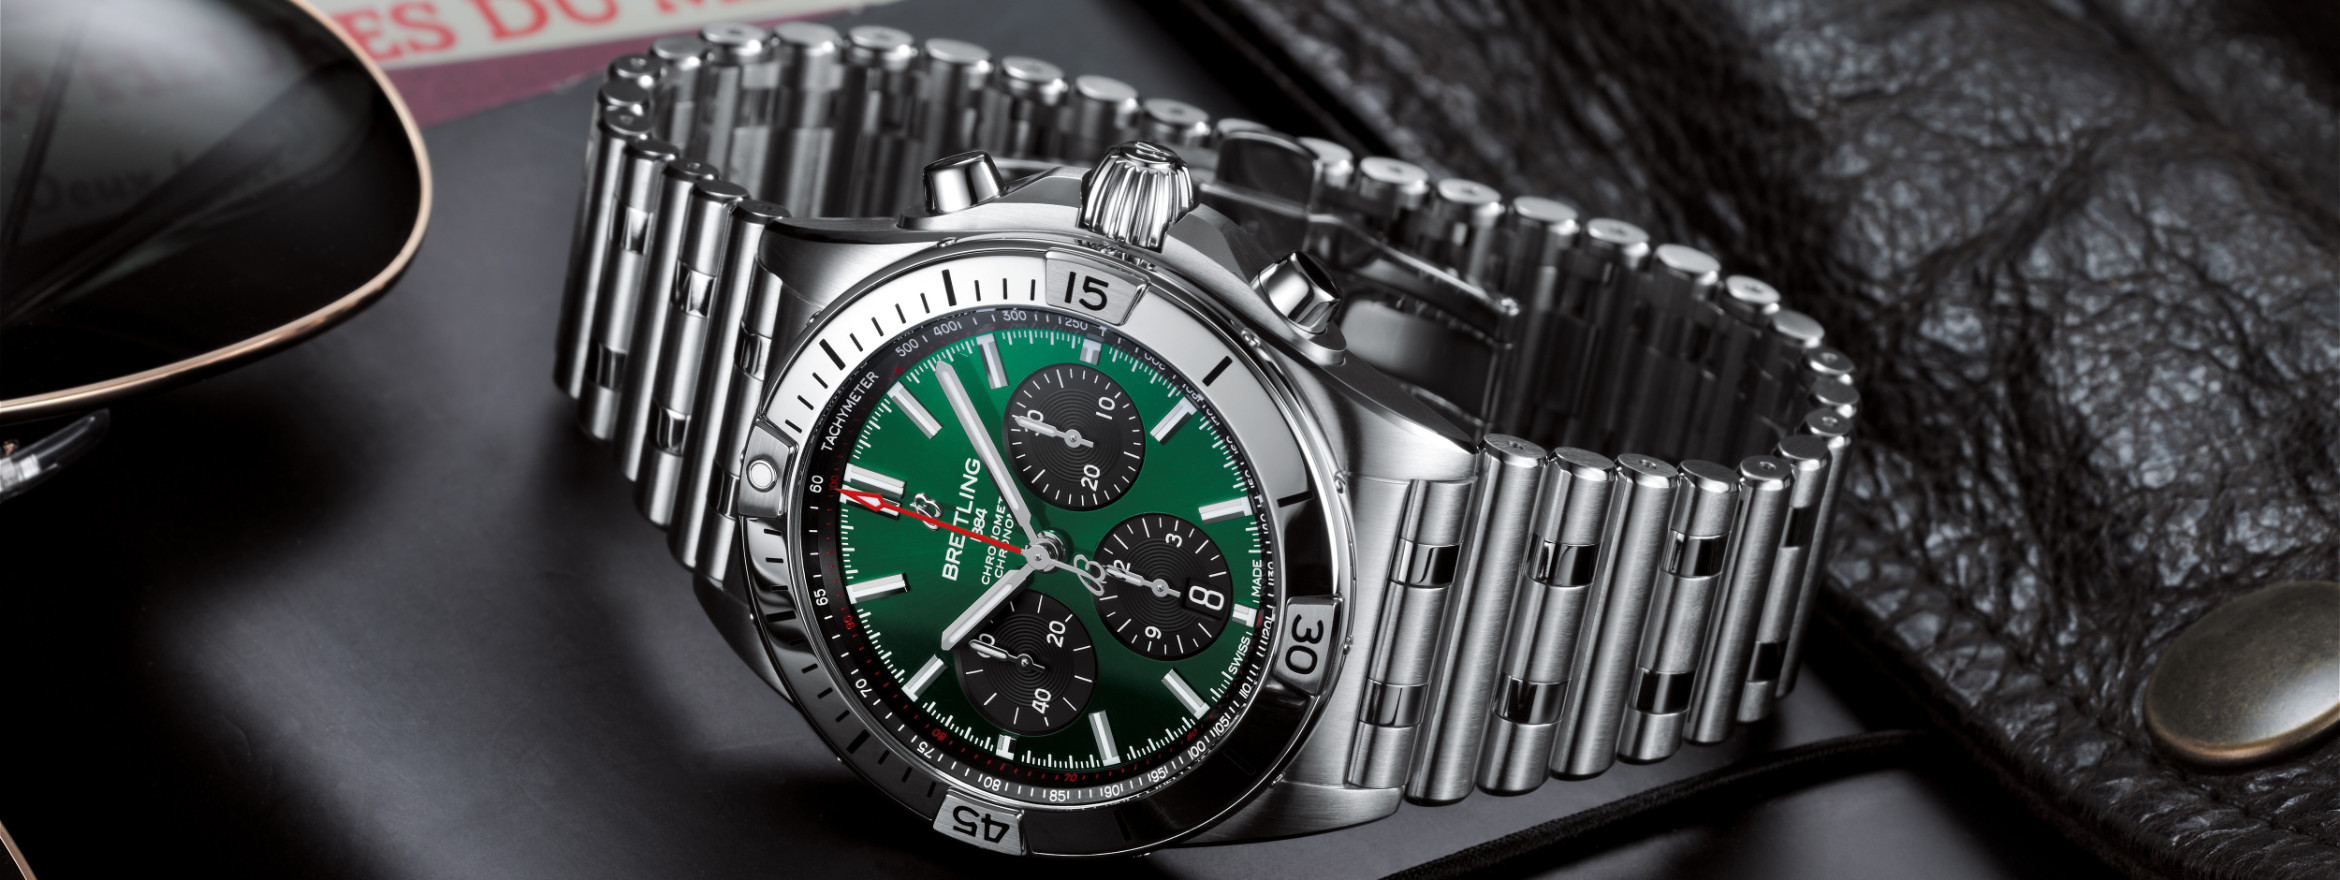 Introducing The Breitling Chronomat Collection